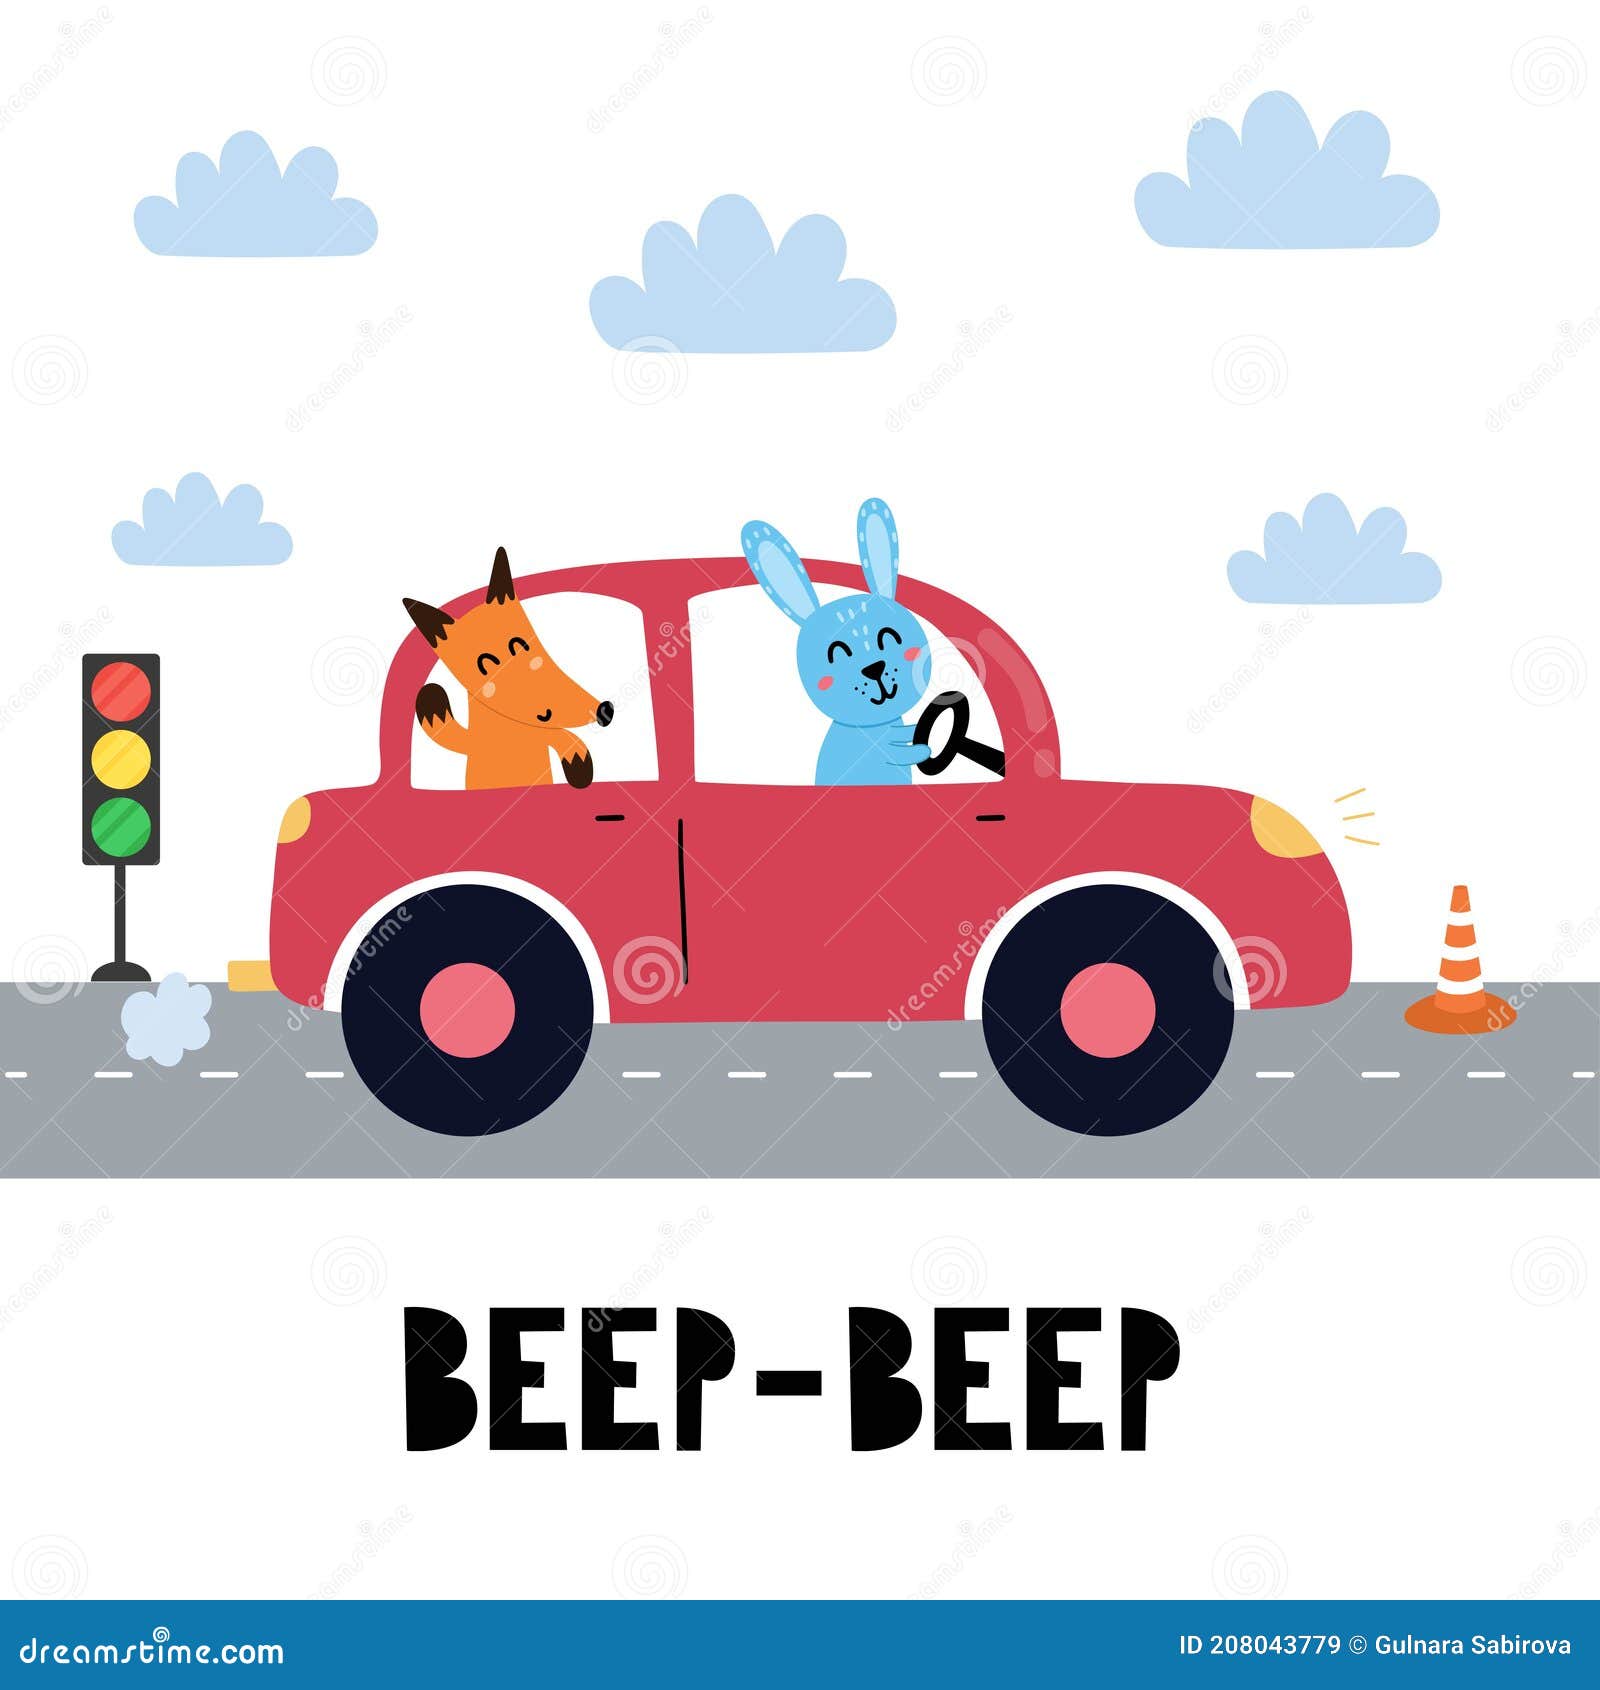 beep beep print with cute rabbit and fox driving the red car. funny background